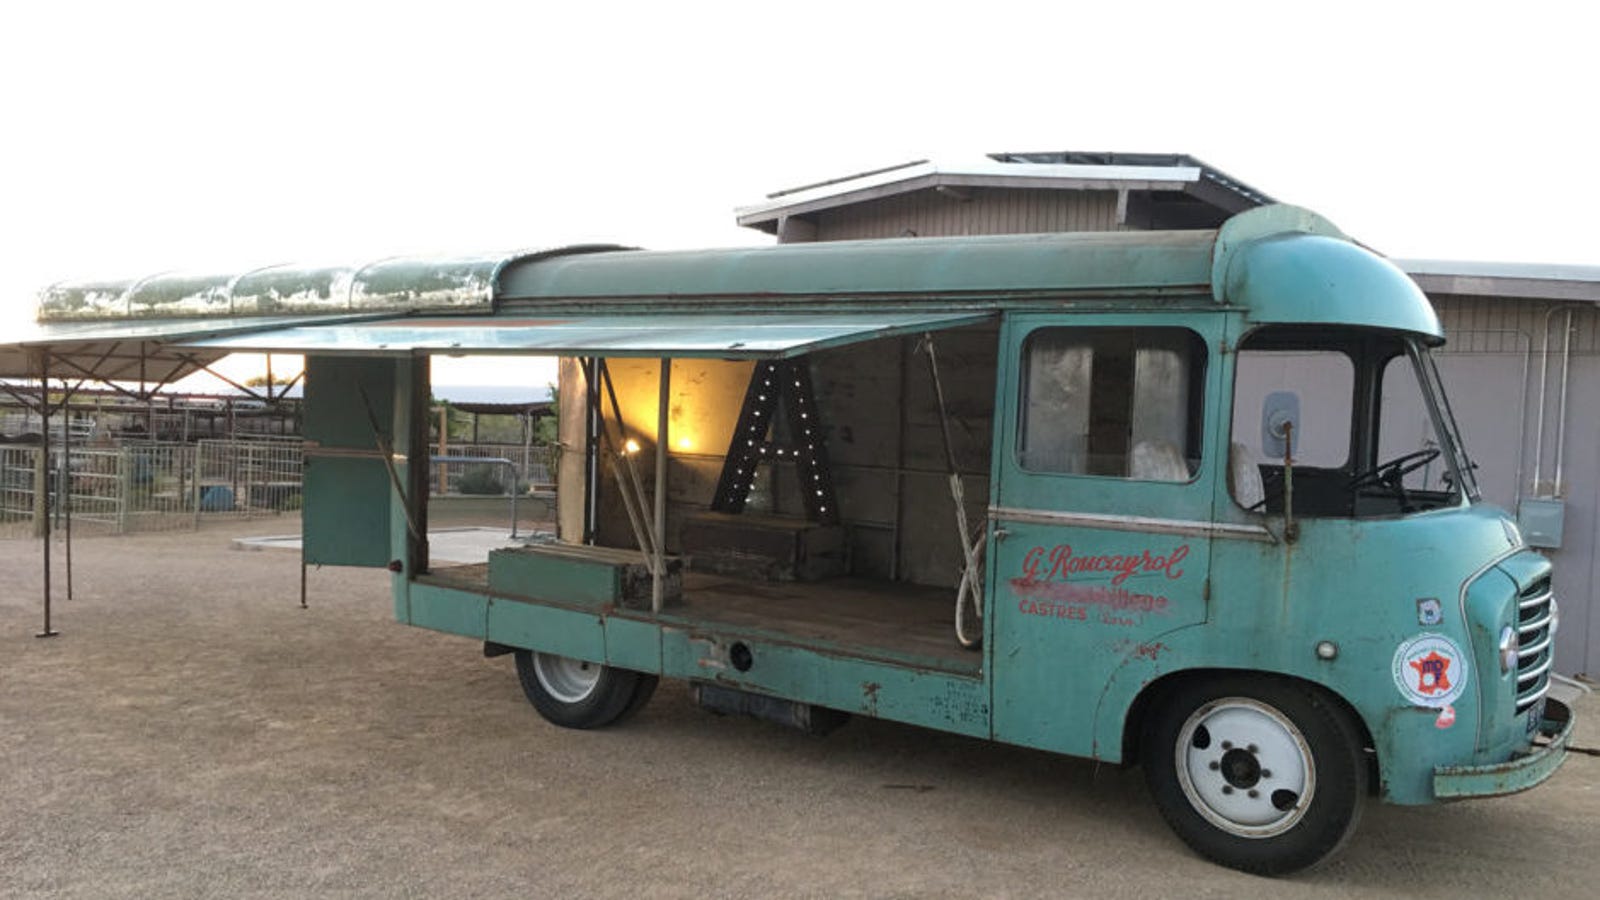 This French Van From the 1950s is the Mobile Storefront Every Small